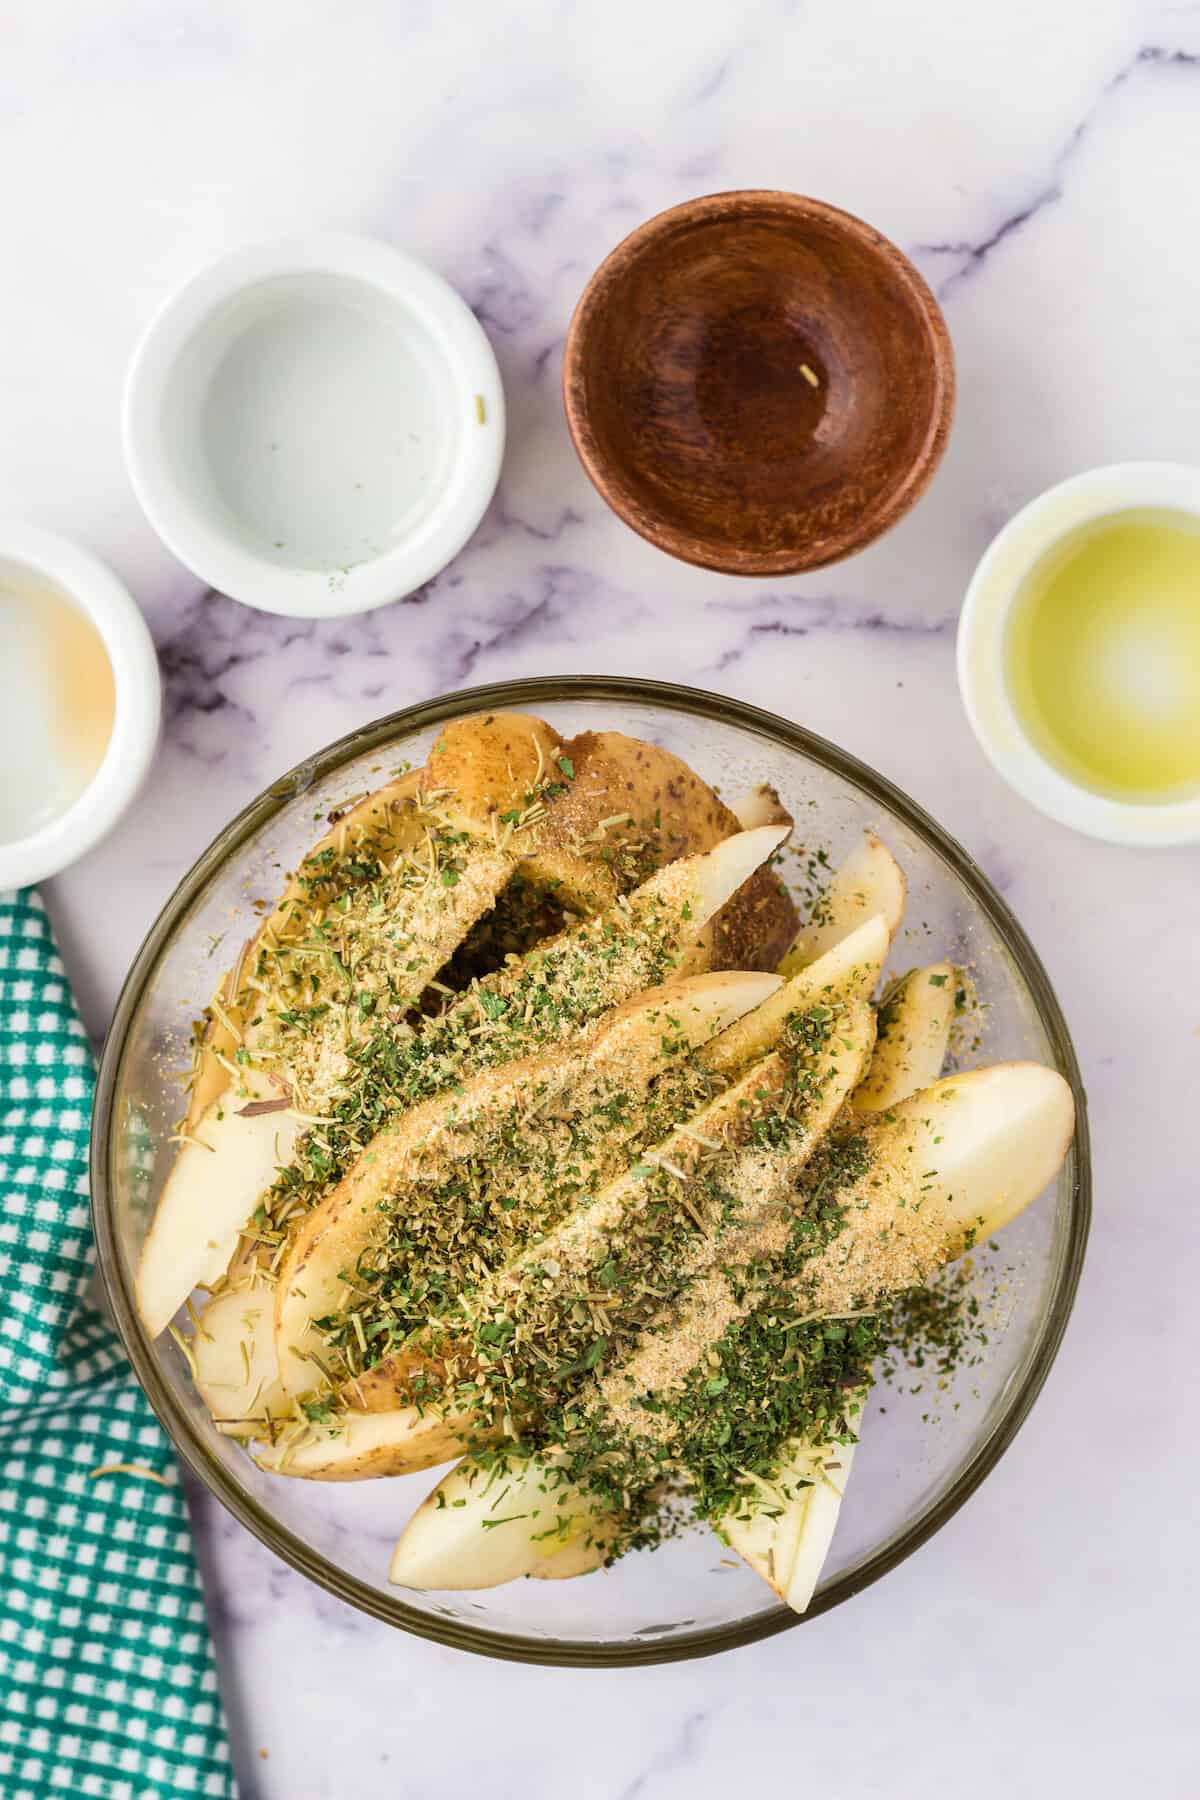 herbs and seasonings on the potato wedges in a glass bowl.